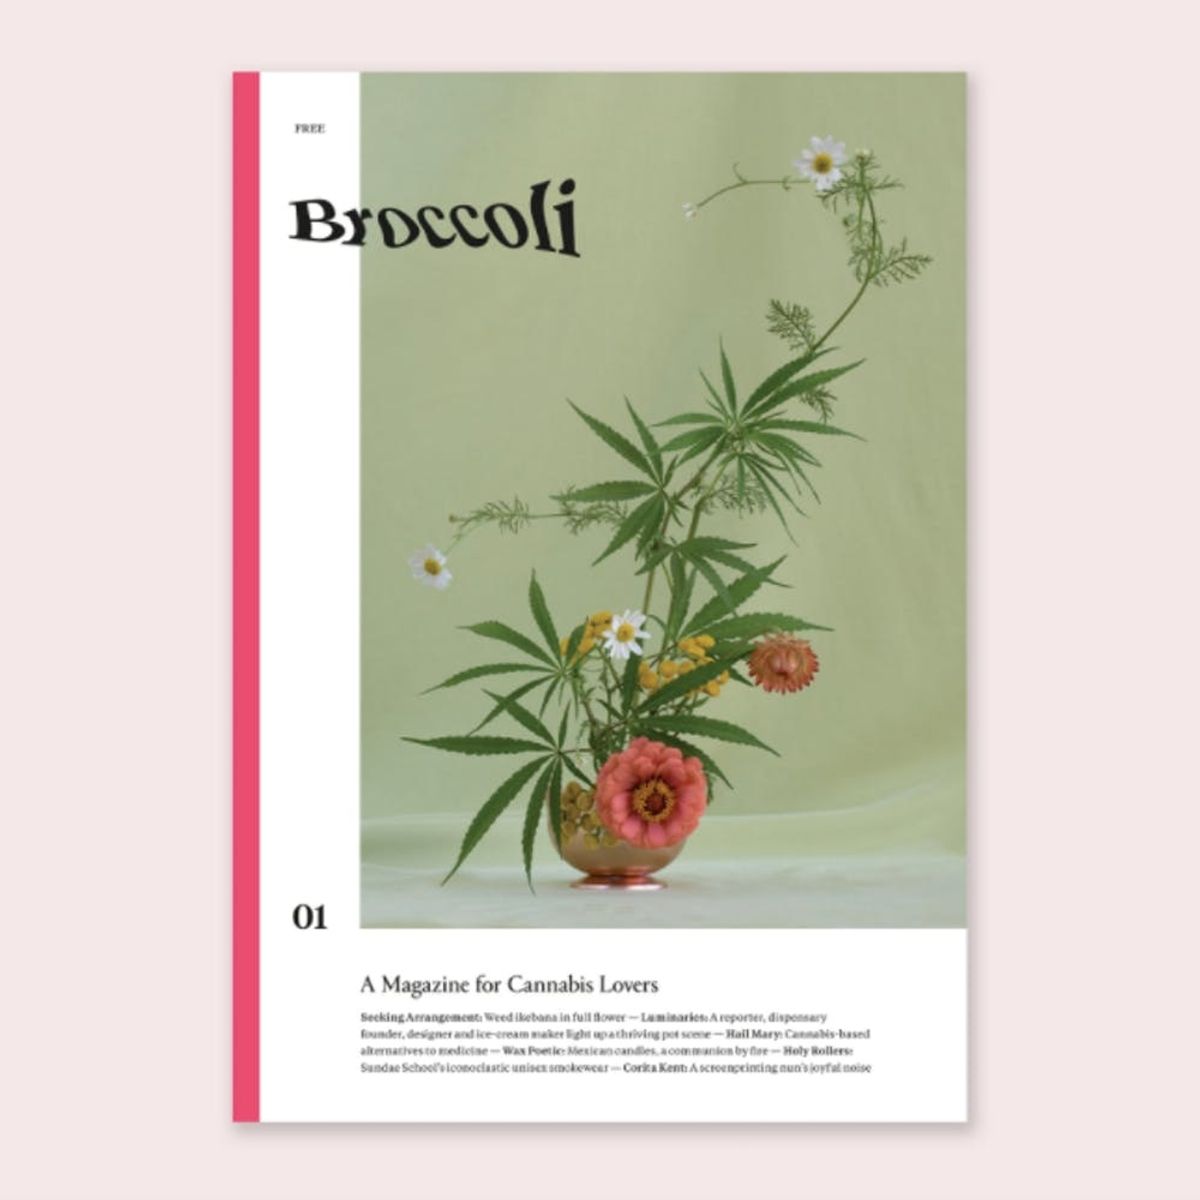 ‘Broccoli’ Is a Beautiful, Kinfolk-Style Magazine for Women All About Weed